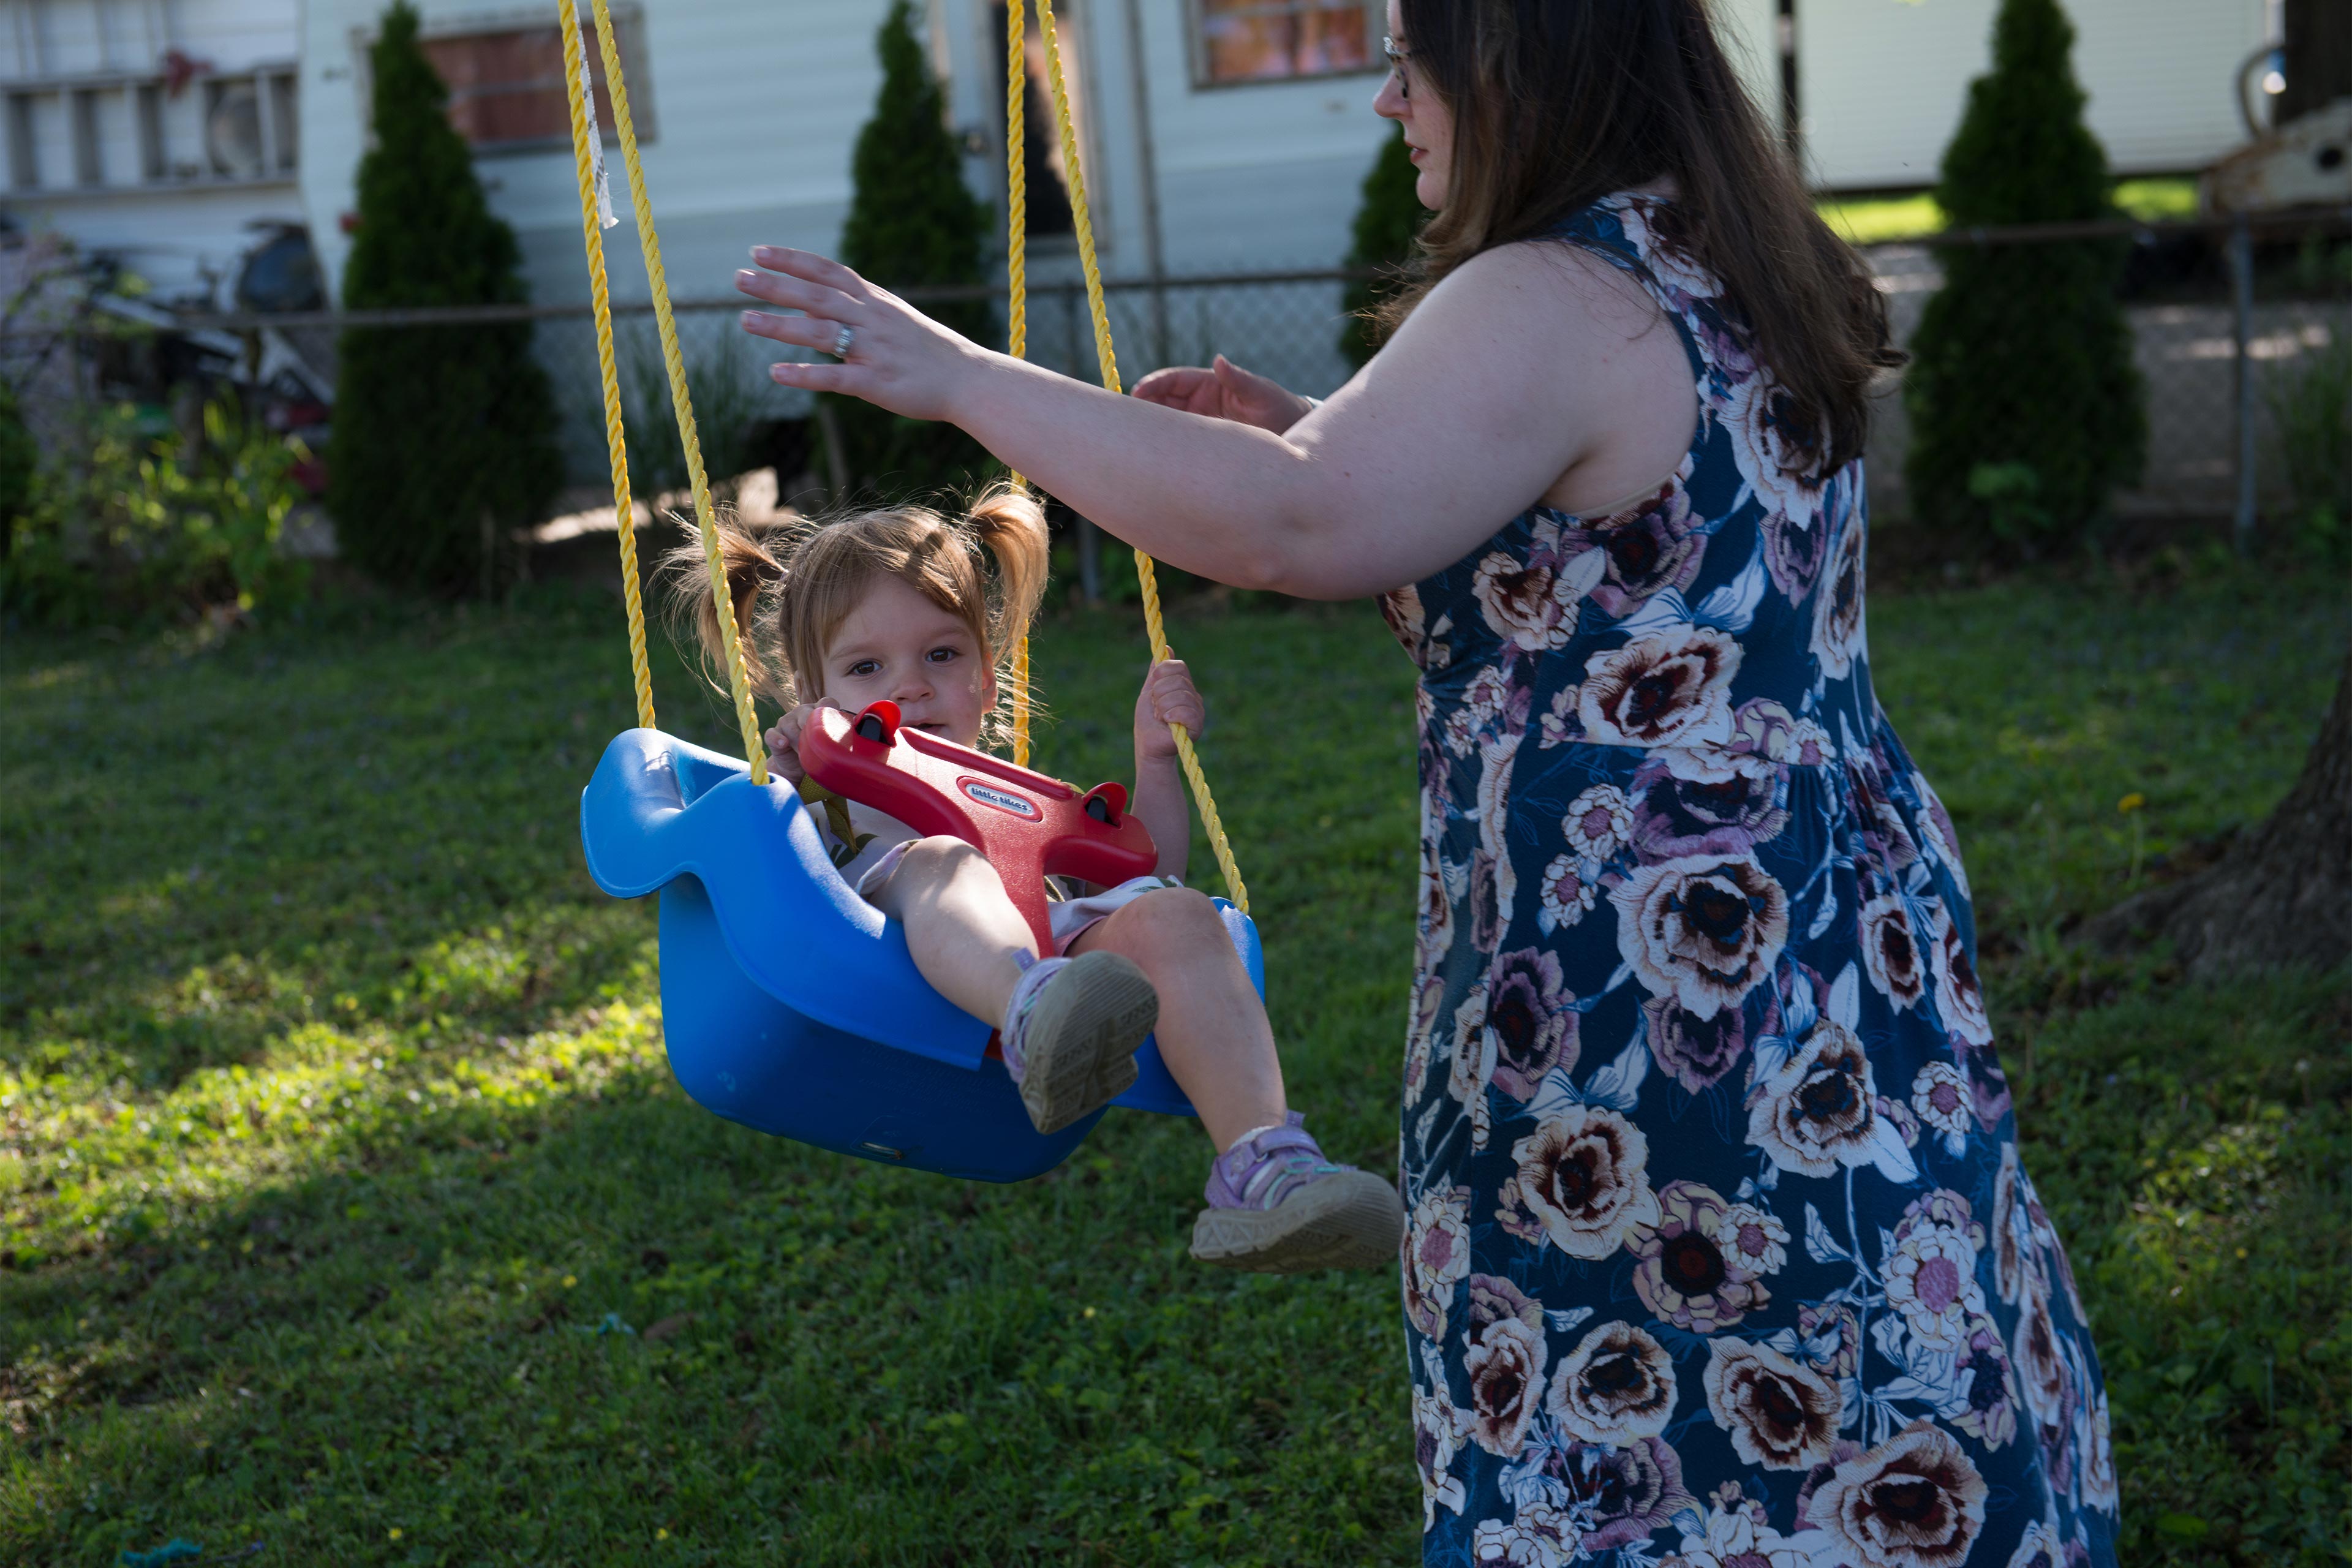 A photo of a mother pushing her toddler daughter on a swing.